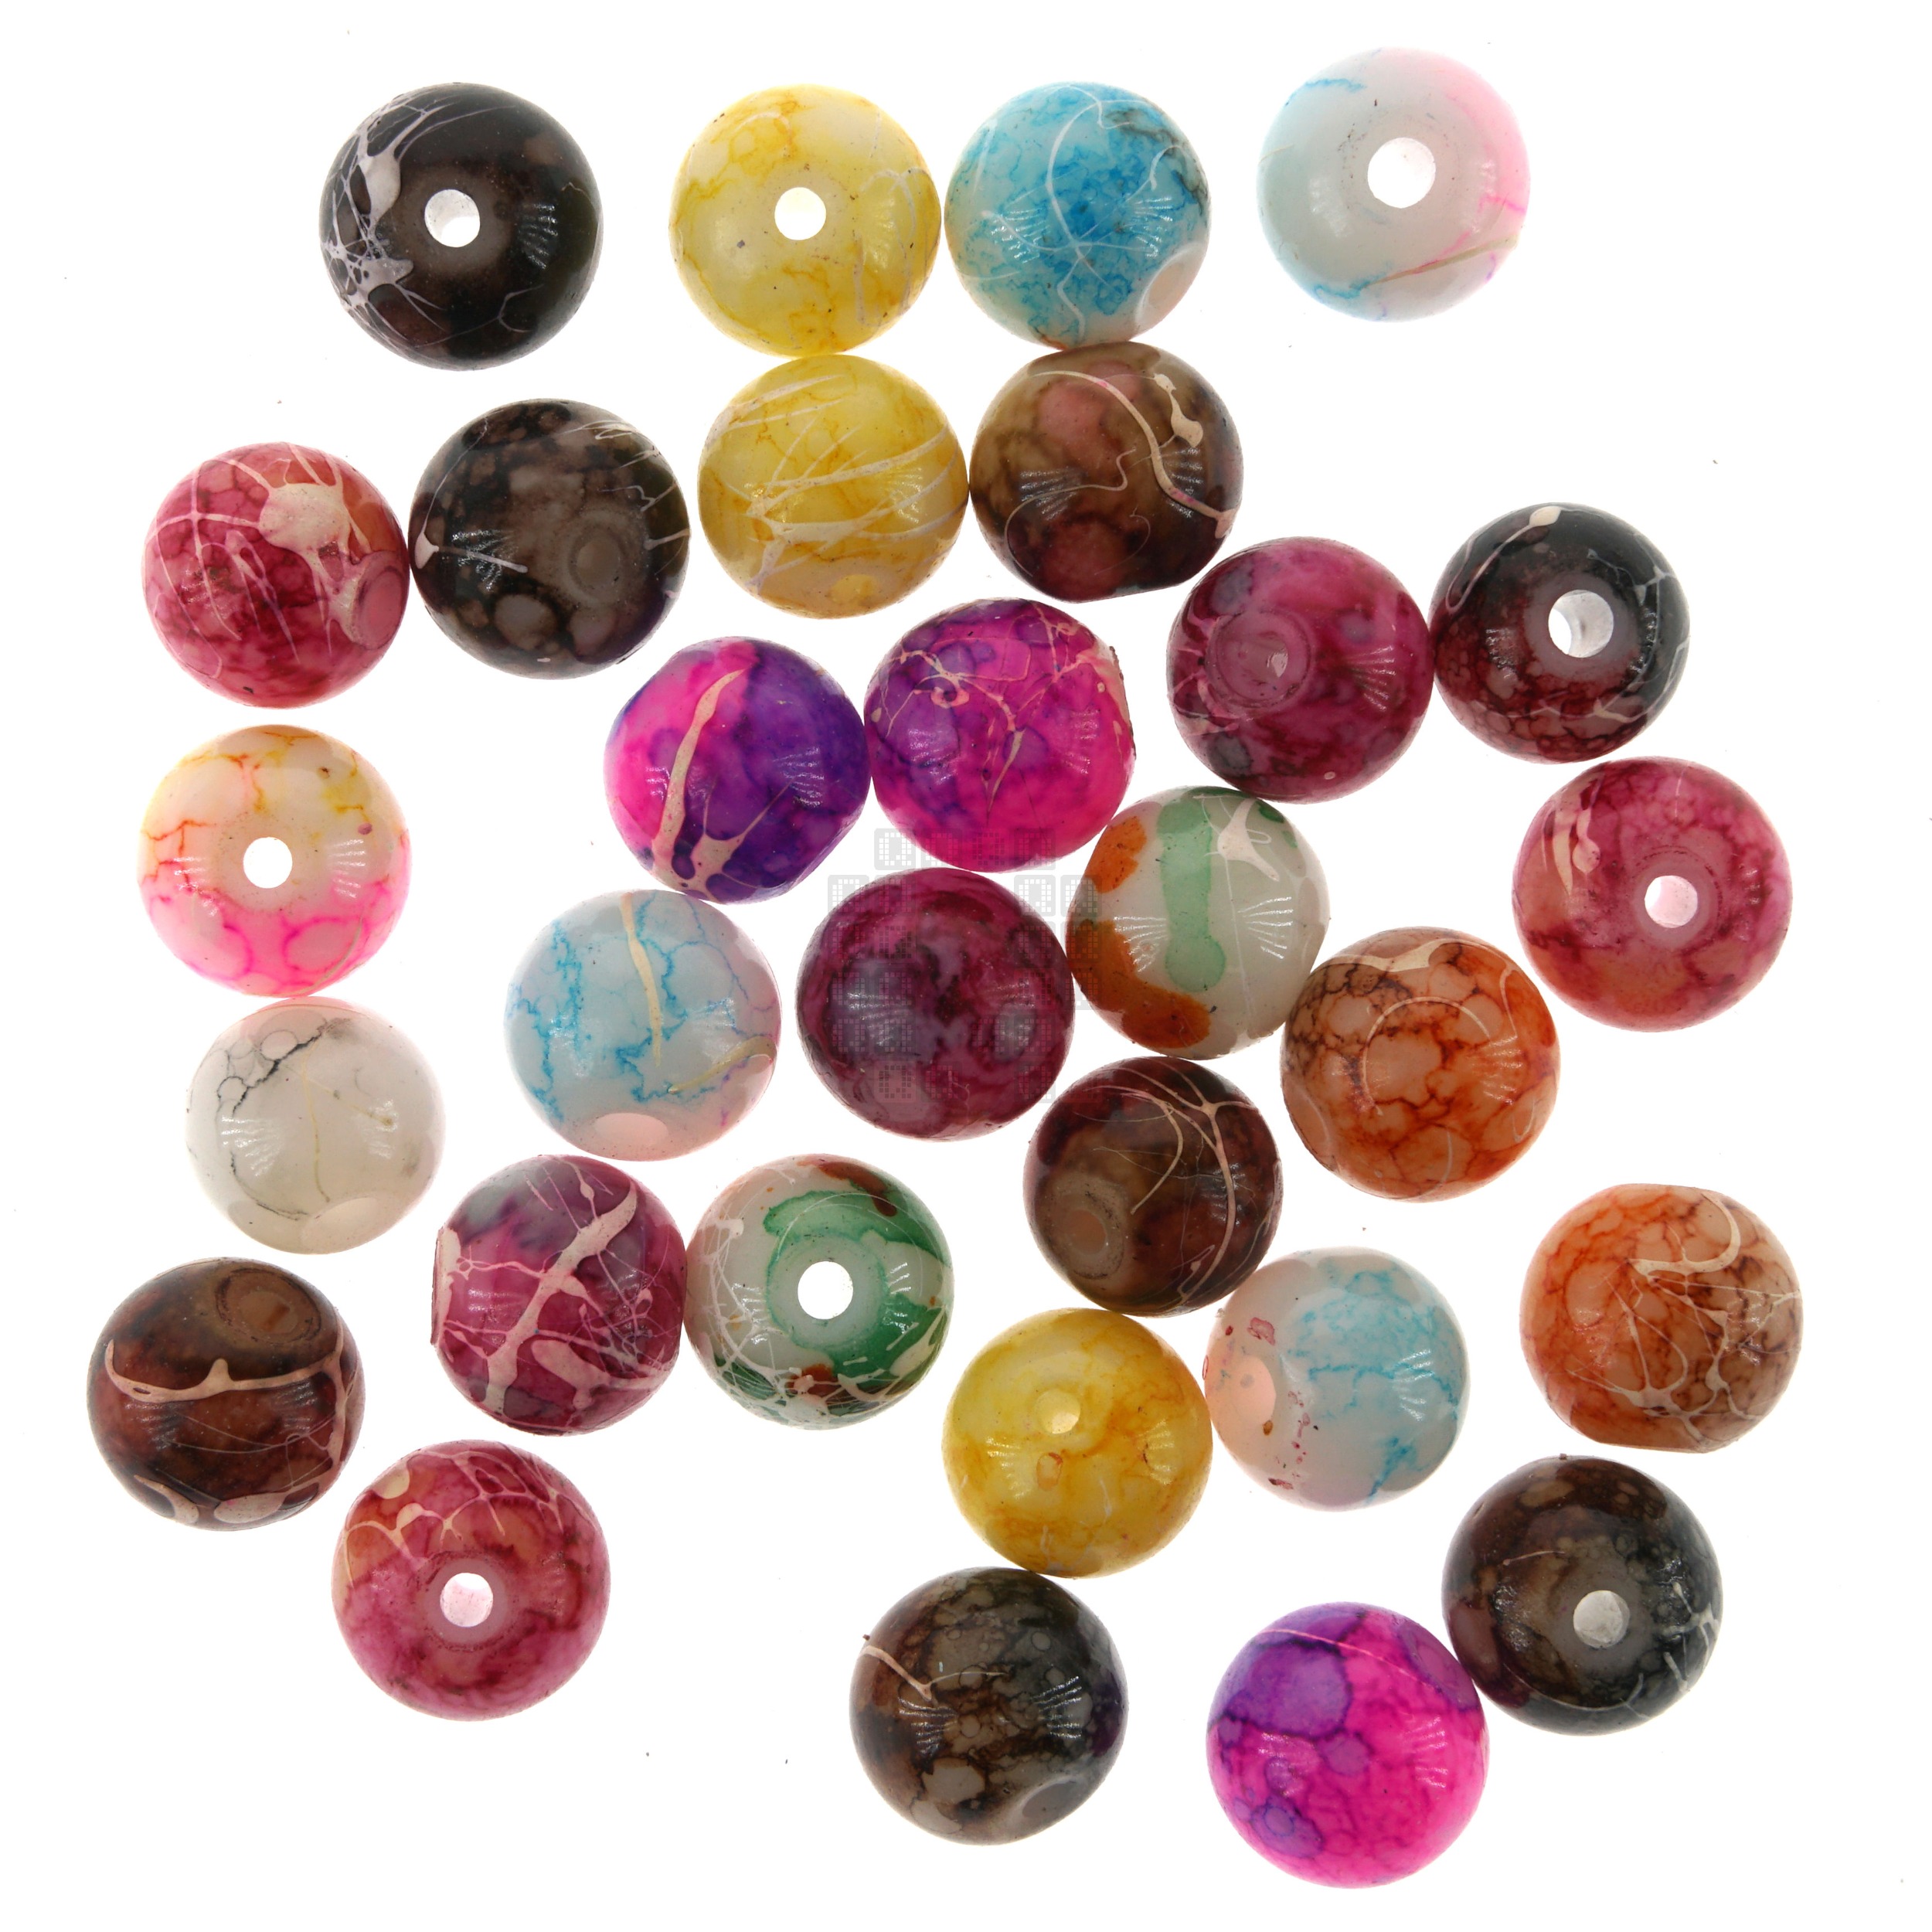 Carnival (Multi-color) 8mm Loose Glass Beads, 30 Pieces